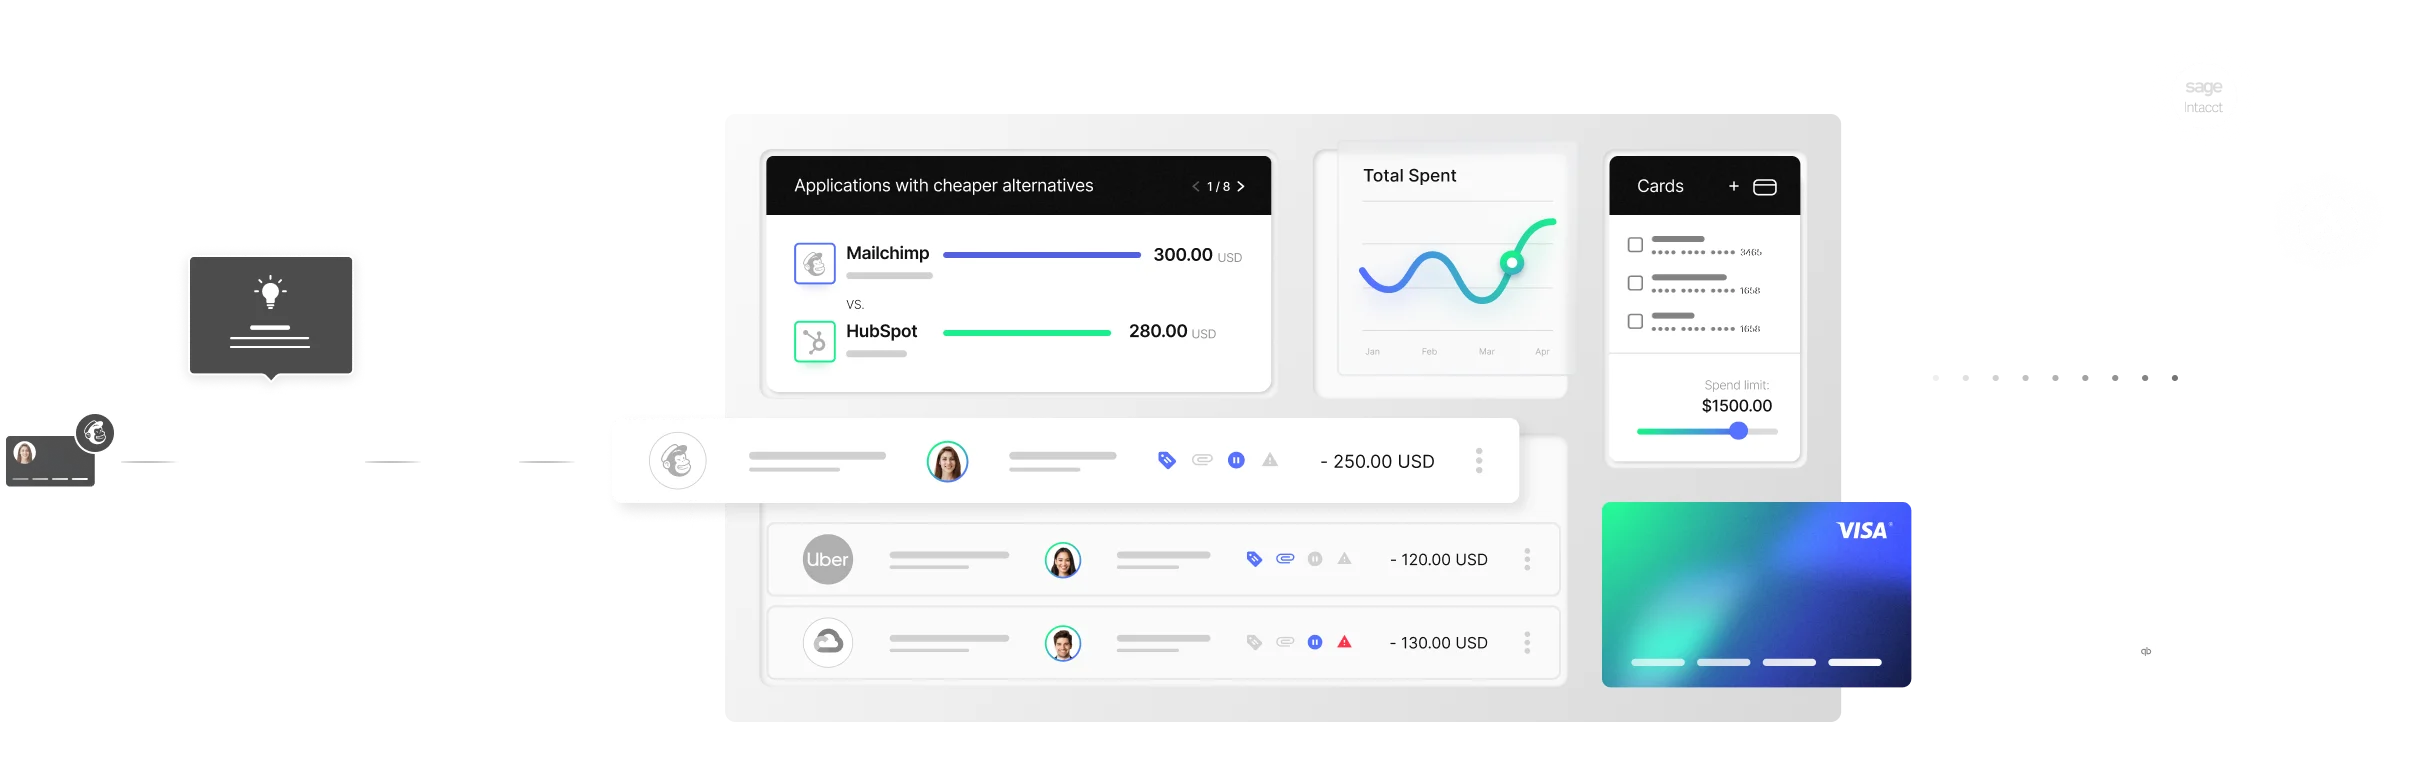 Mesh fully automated unified financial management platform